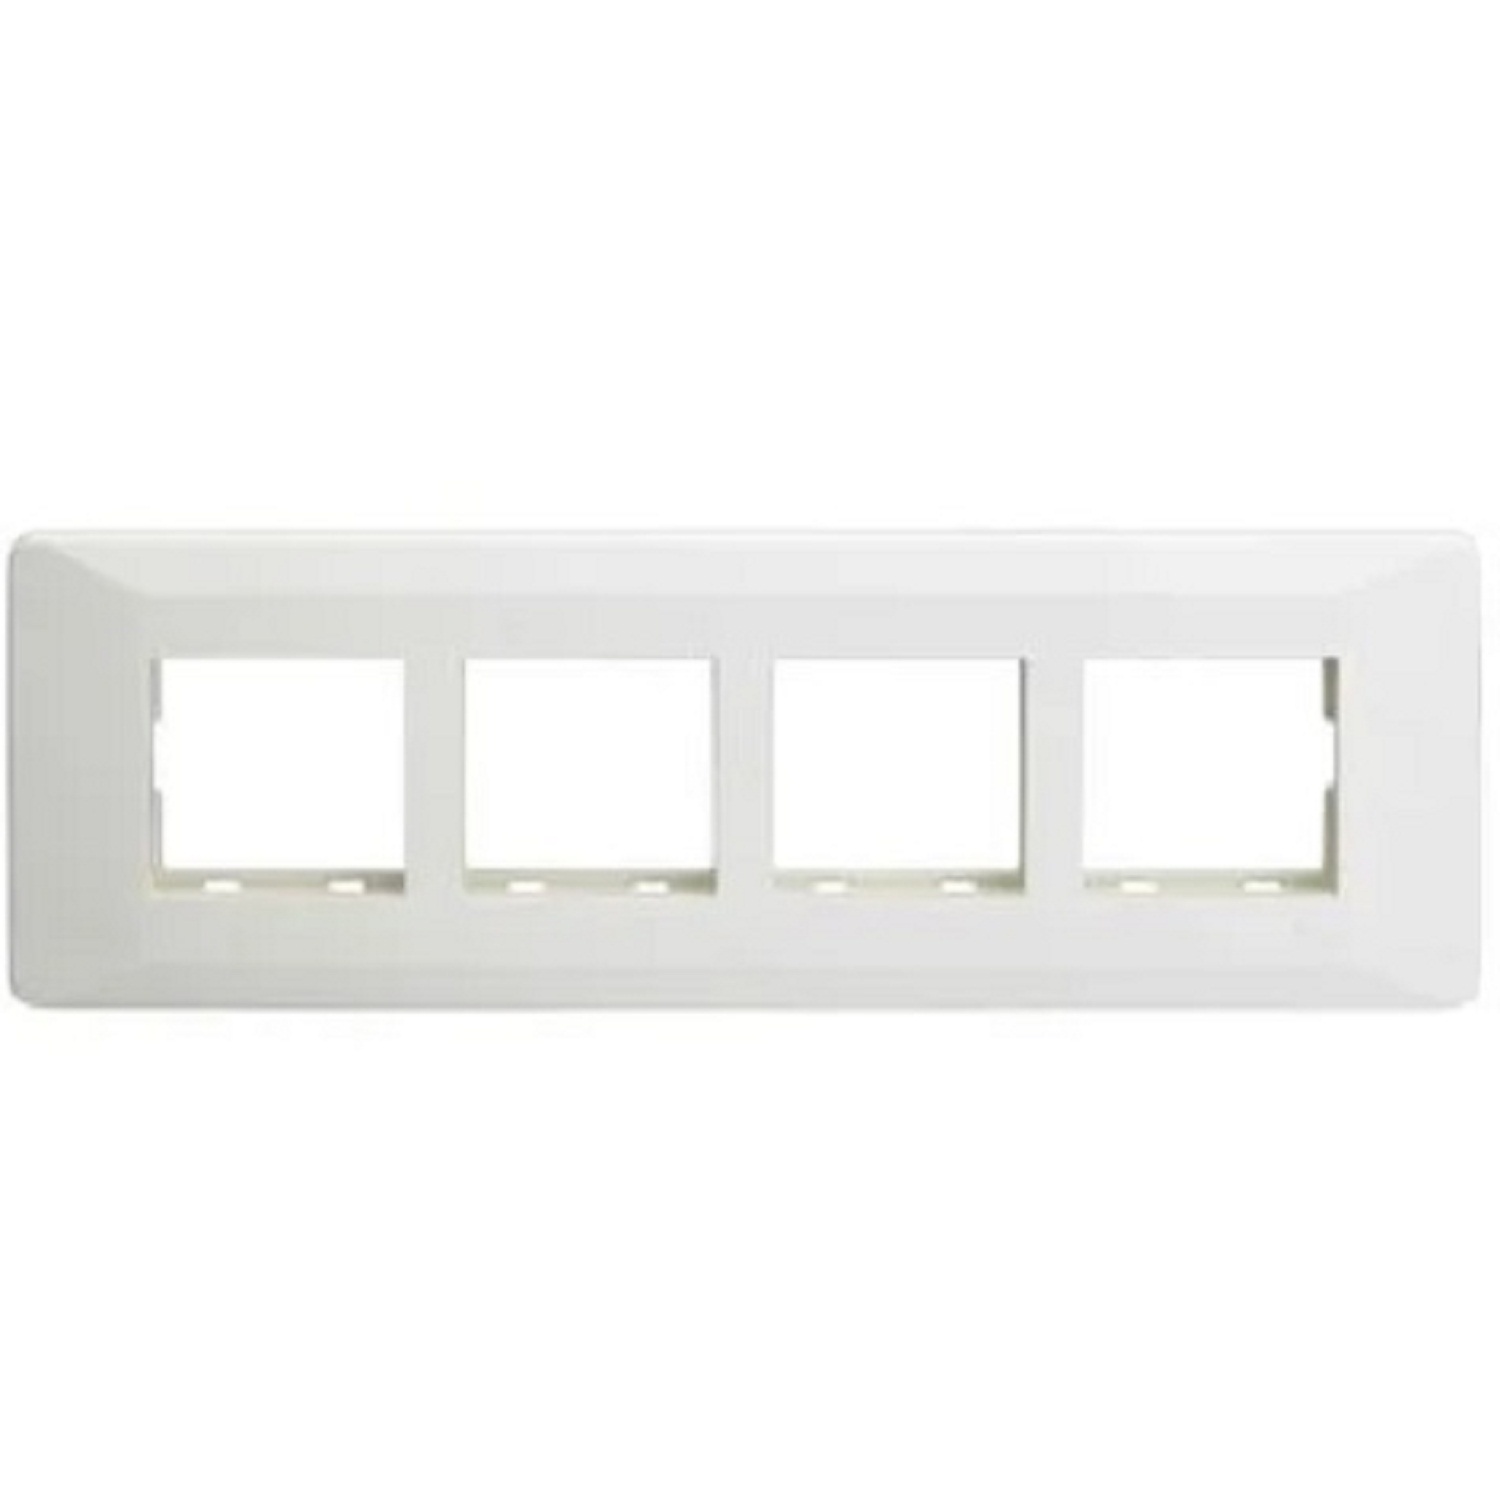 LT Entice 8 Module (Regular) Horizontal Cover Plate with Base Frame - White